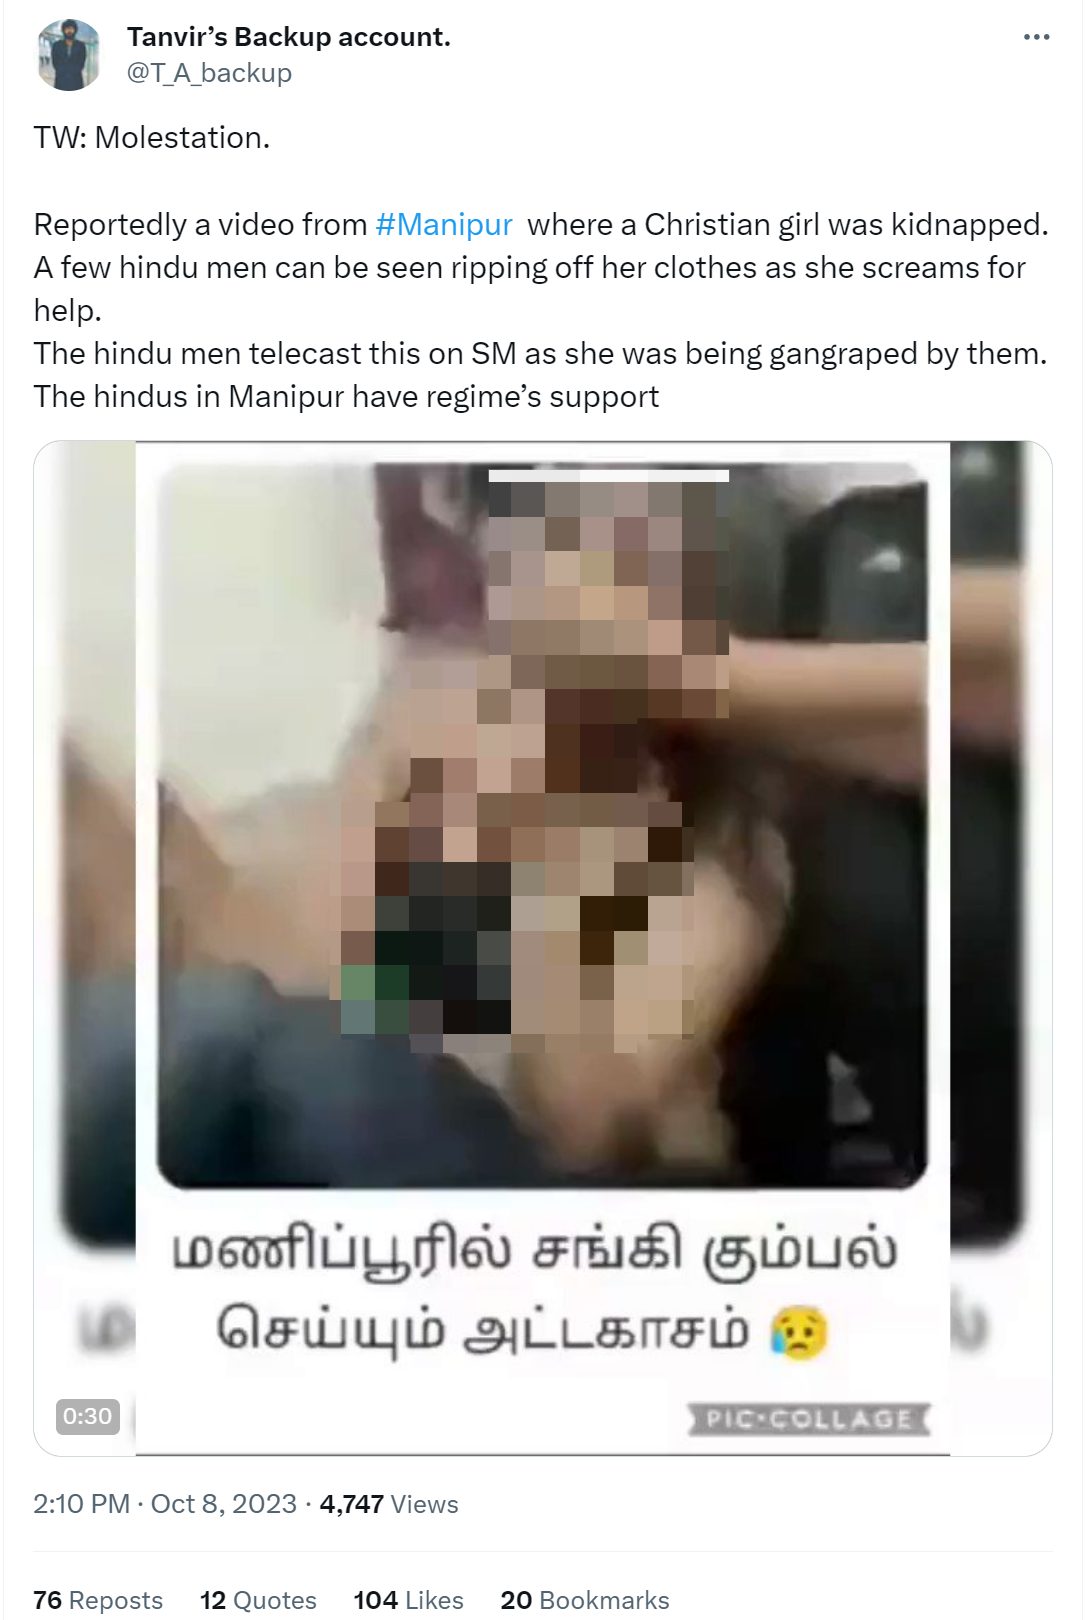 Real Rape Viral Video Porn - Old video of sexual assault case in Bengaluru involving Bangladeshis viral  as recent incident in Manipur - Alt News